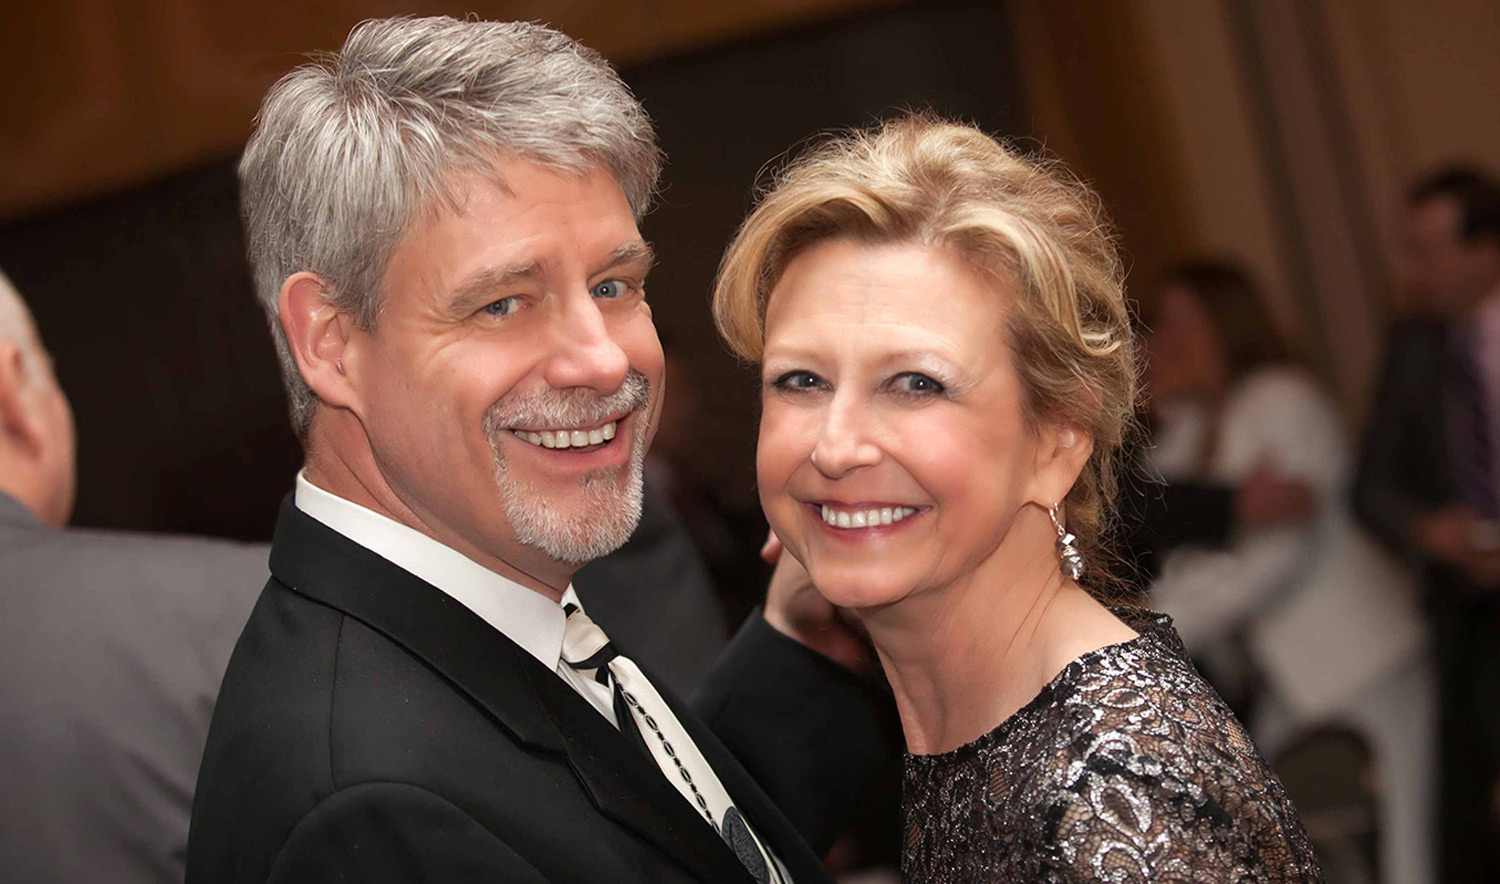 A portrait of Bill and Debra Brown at a formal event.